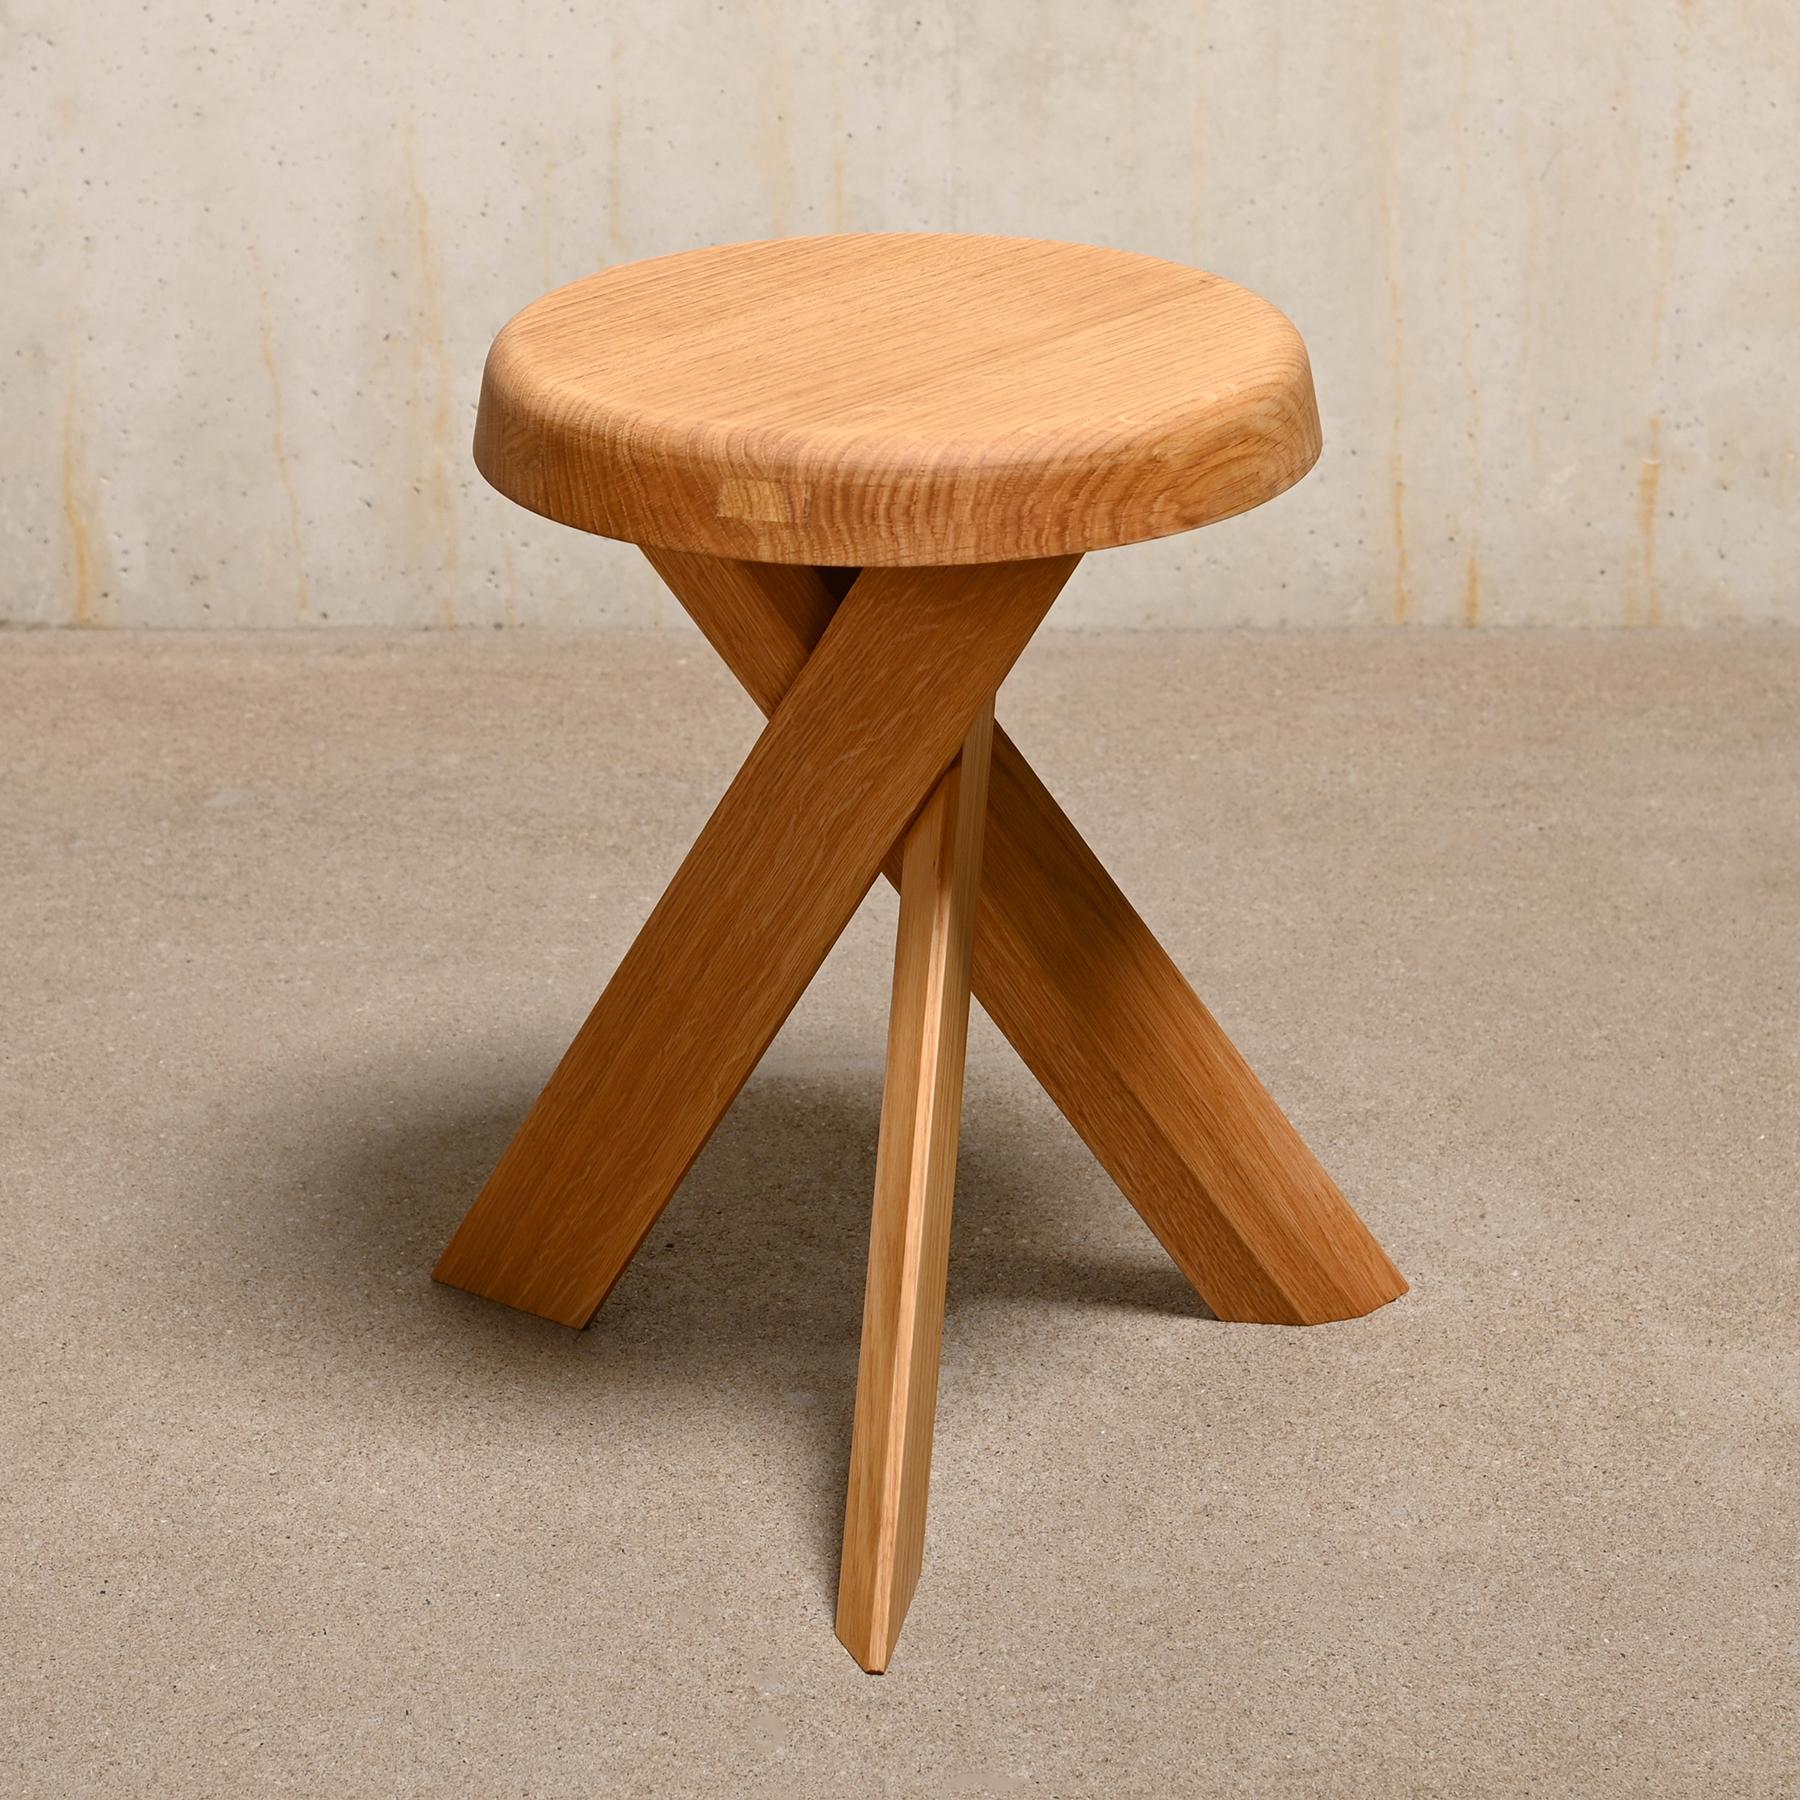 Stool S31A designed by Pierre Chapo around 1960 and manufactured by Chapo Creation in France, 2023. 
Solid oak wood finished in naturel oil. Excellent original condition and signed by manufacture stamp.

This stool can also be ordered in solid